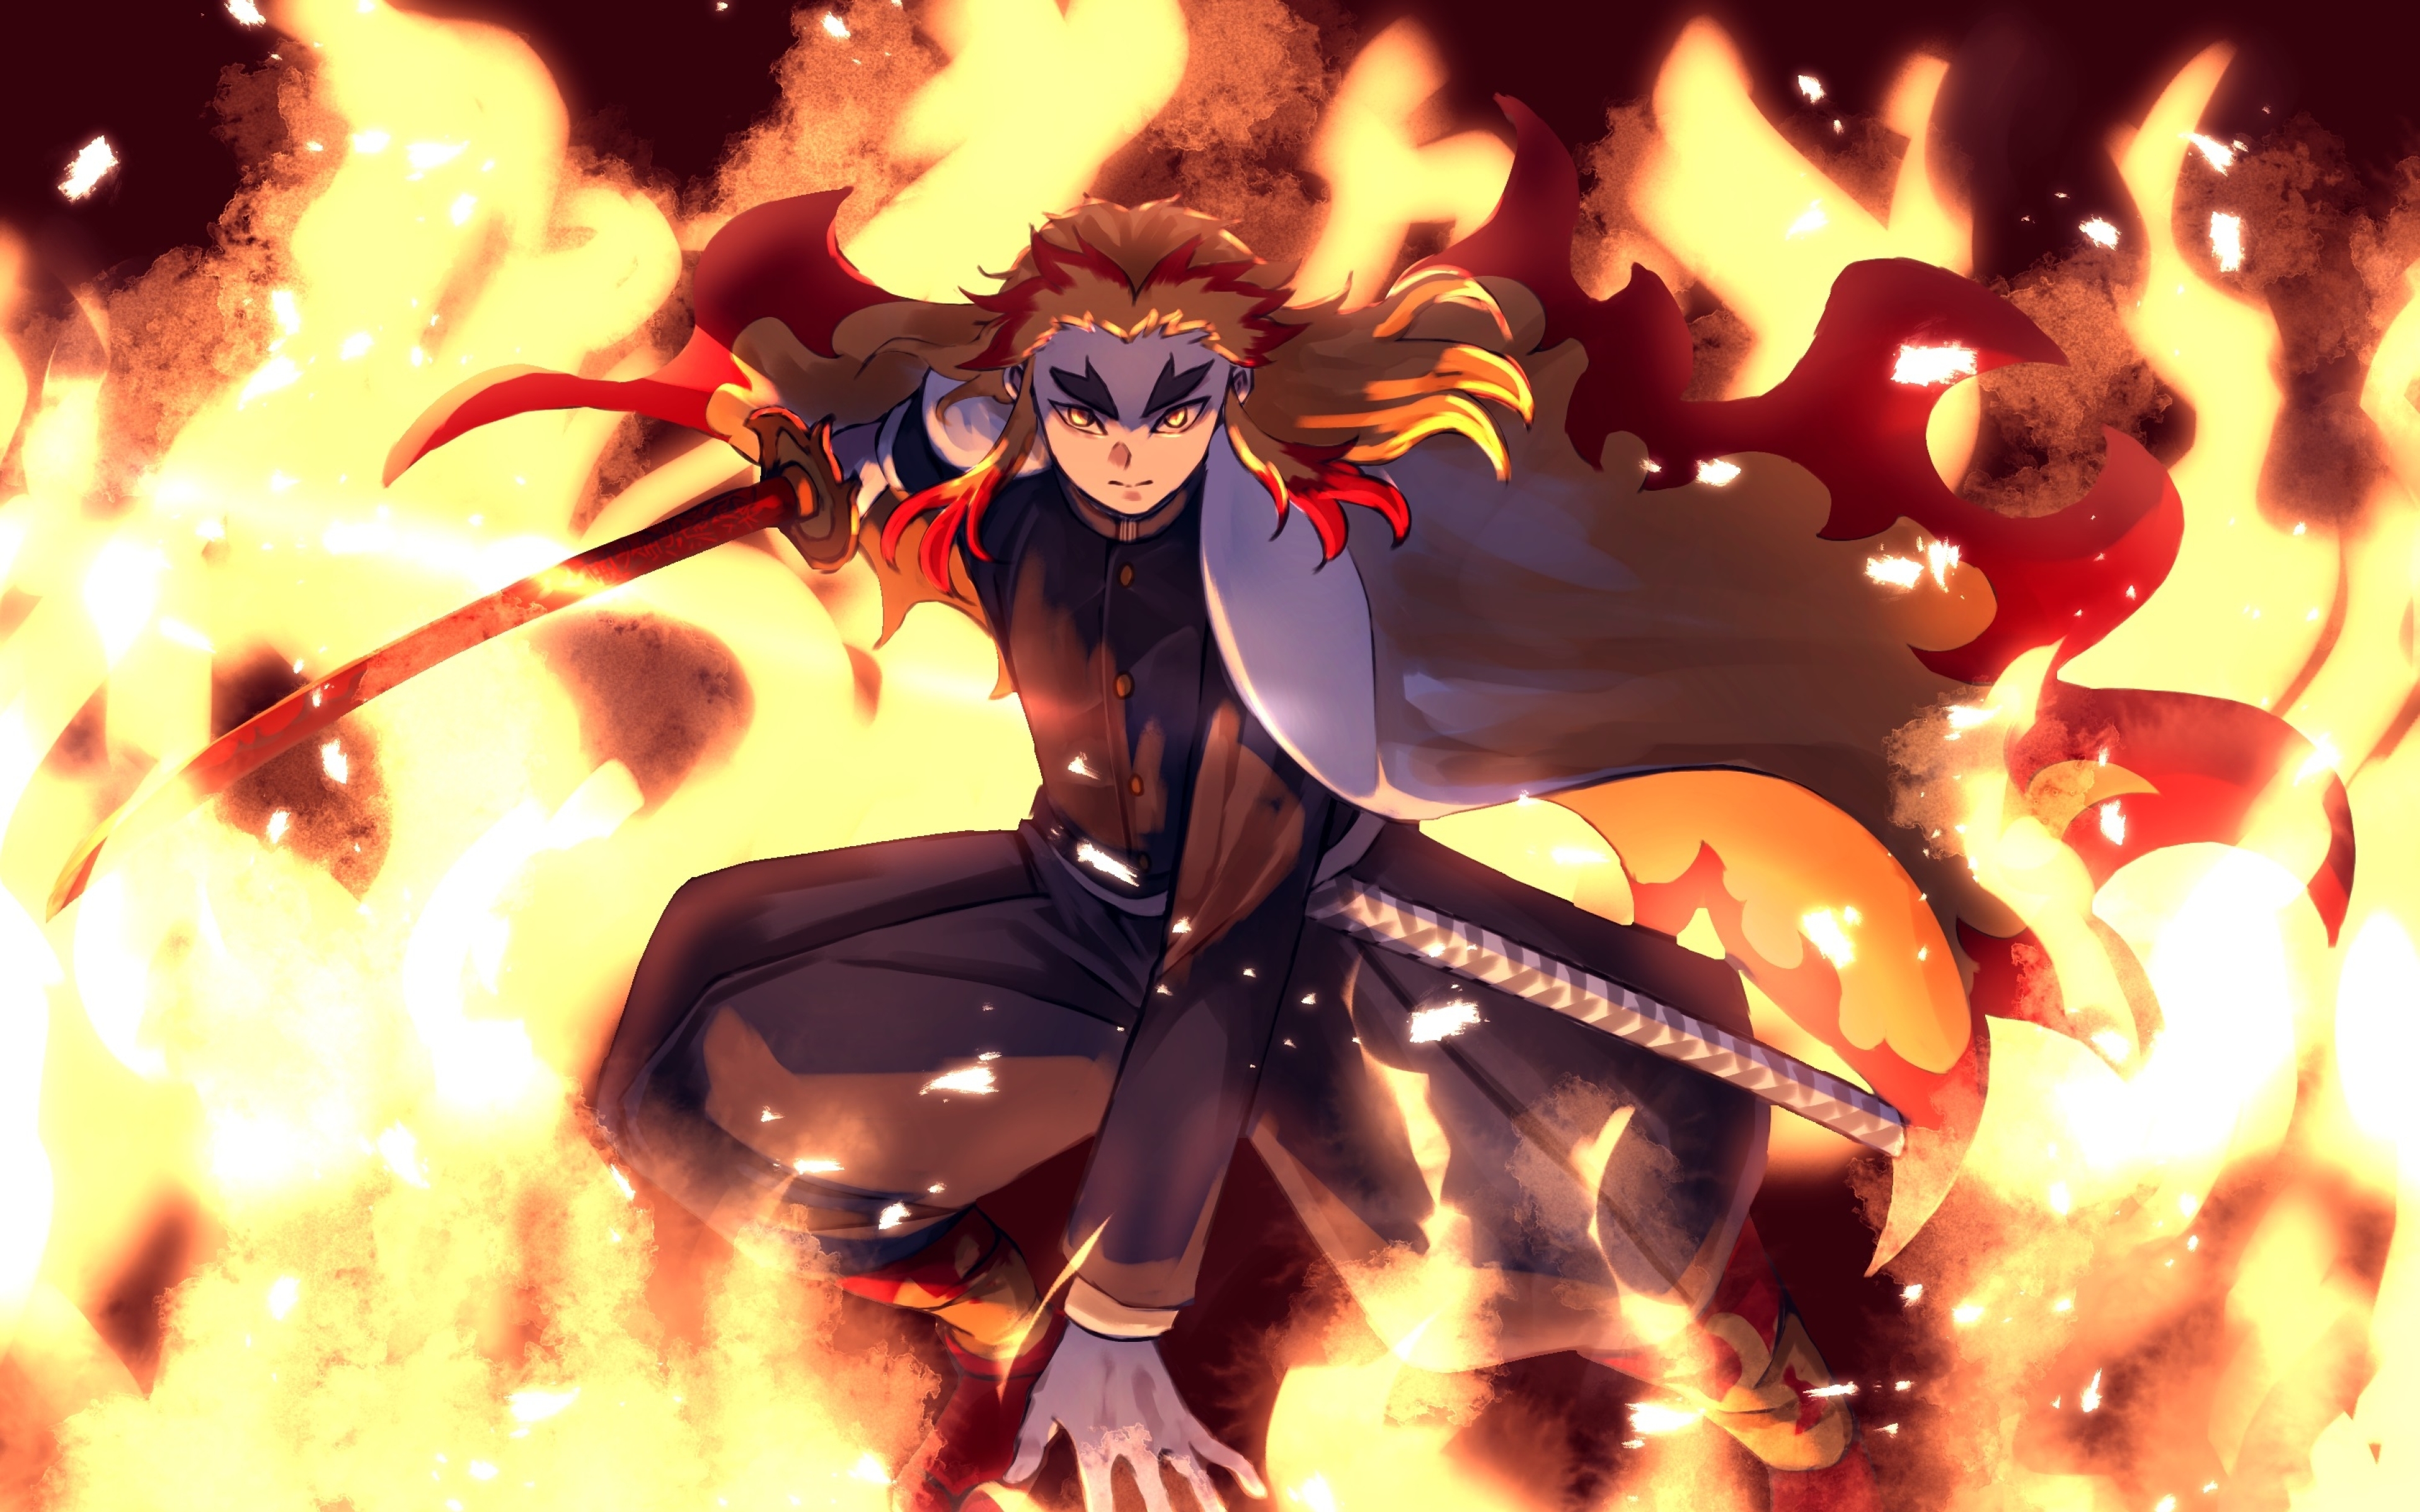 3840x2400 Kyojuro Rengoku From Demon Slayer Uhd 4k 3840x2400 Resolution Wallpaper Hd Anime 4k Wallpapers Images Photos And Background Wallpapers Den